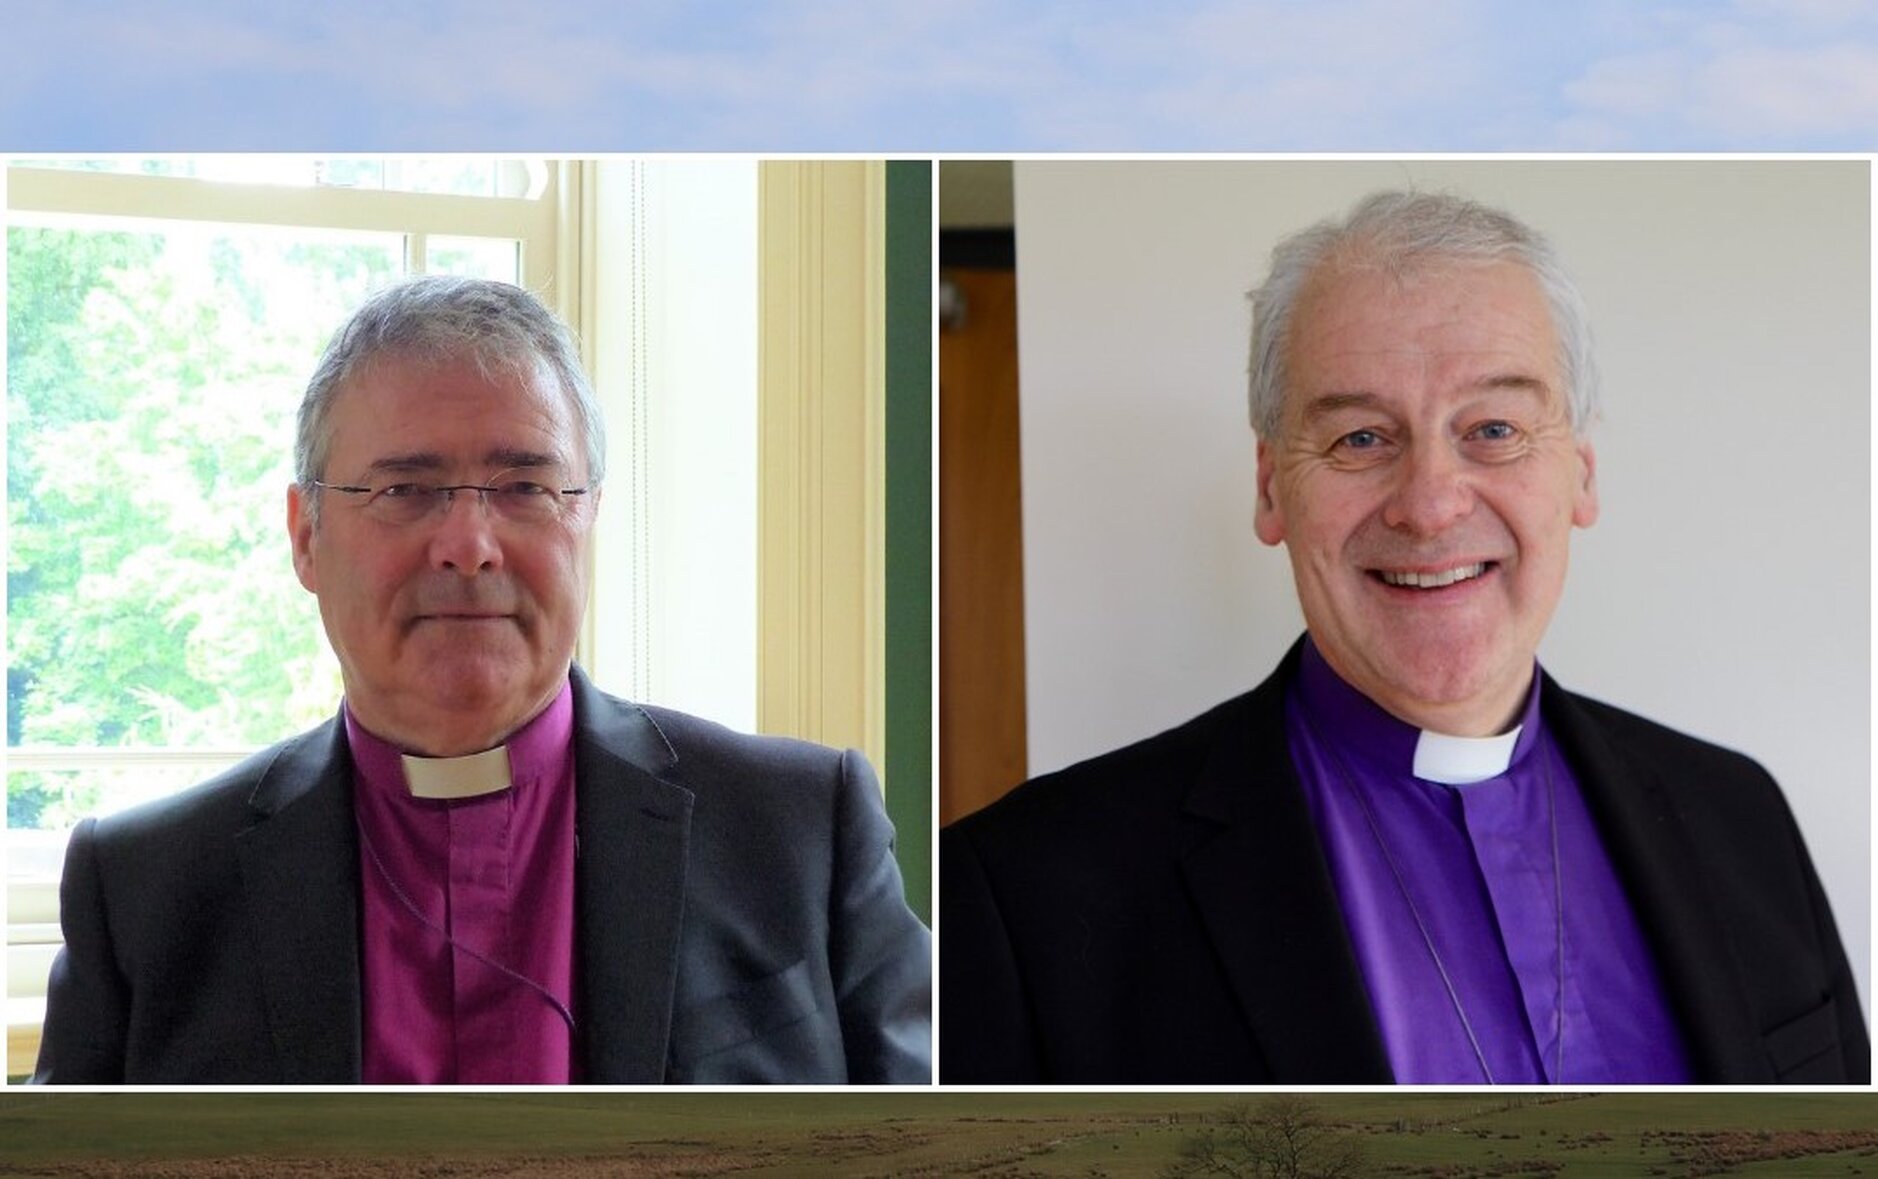 ‘It is a human duty to welcome those who flee oppression’ – Archbishops’ Joint Statement for St Patrick’s Day - The Church of Ireland Archbishops of Armagh and Dublin have issued a statement for St Patrick’s Day. Archbishop John McDowell and Archbishop Michael Jackson have said it is a human duty to welcome people who flee oppression and to make a stand against persecution.
They warned that failure to speak against an anti–immigrant and a racist message ‘creates a new level of tolerance of what only weeks before was intolerable’.
The joint message from the Archbishops outlines how society still had a lot to learn from St Patrick who was ‘an enslaved serf and a trafficked foreigner’.